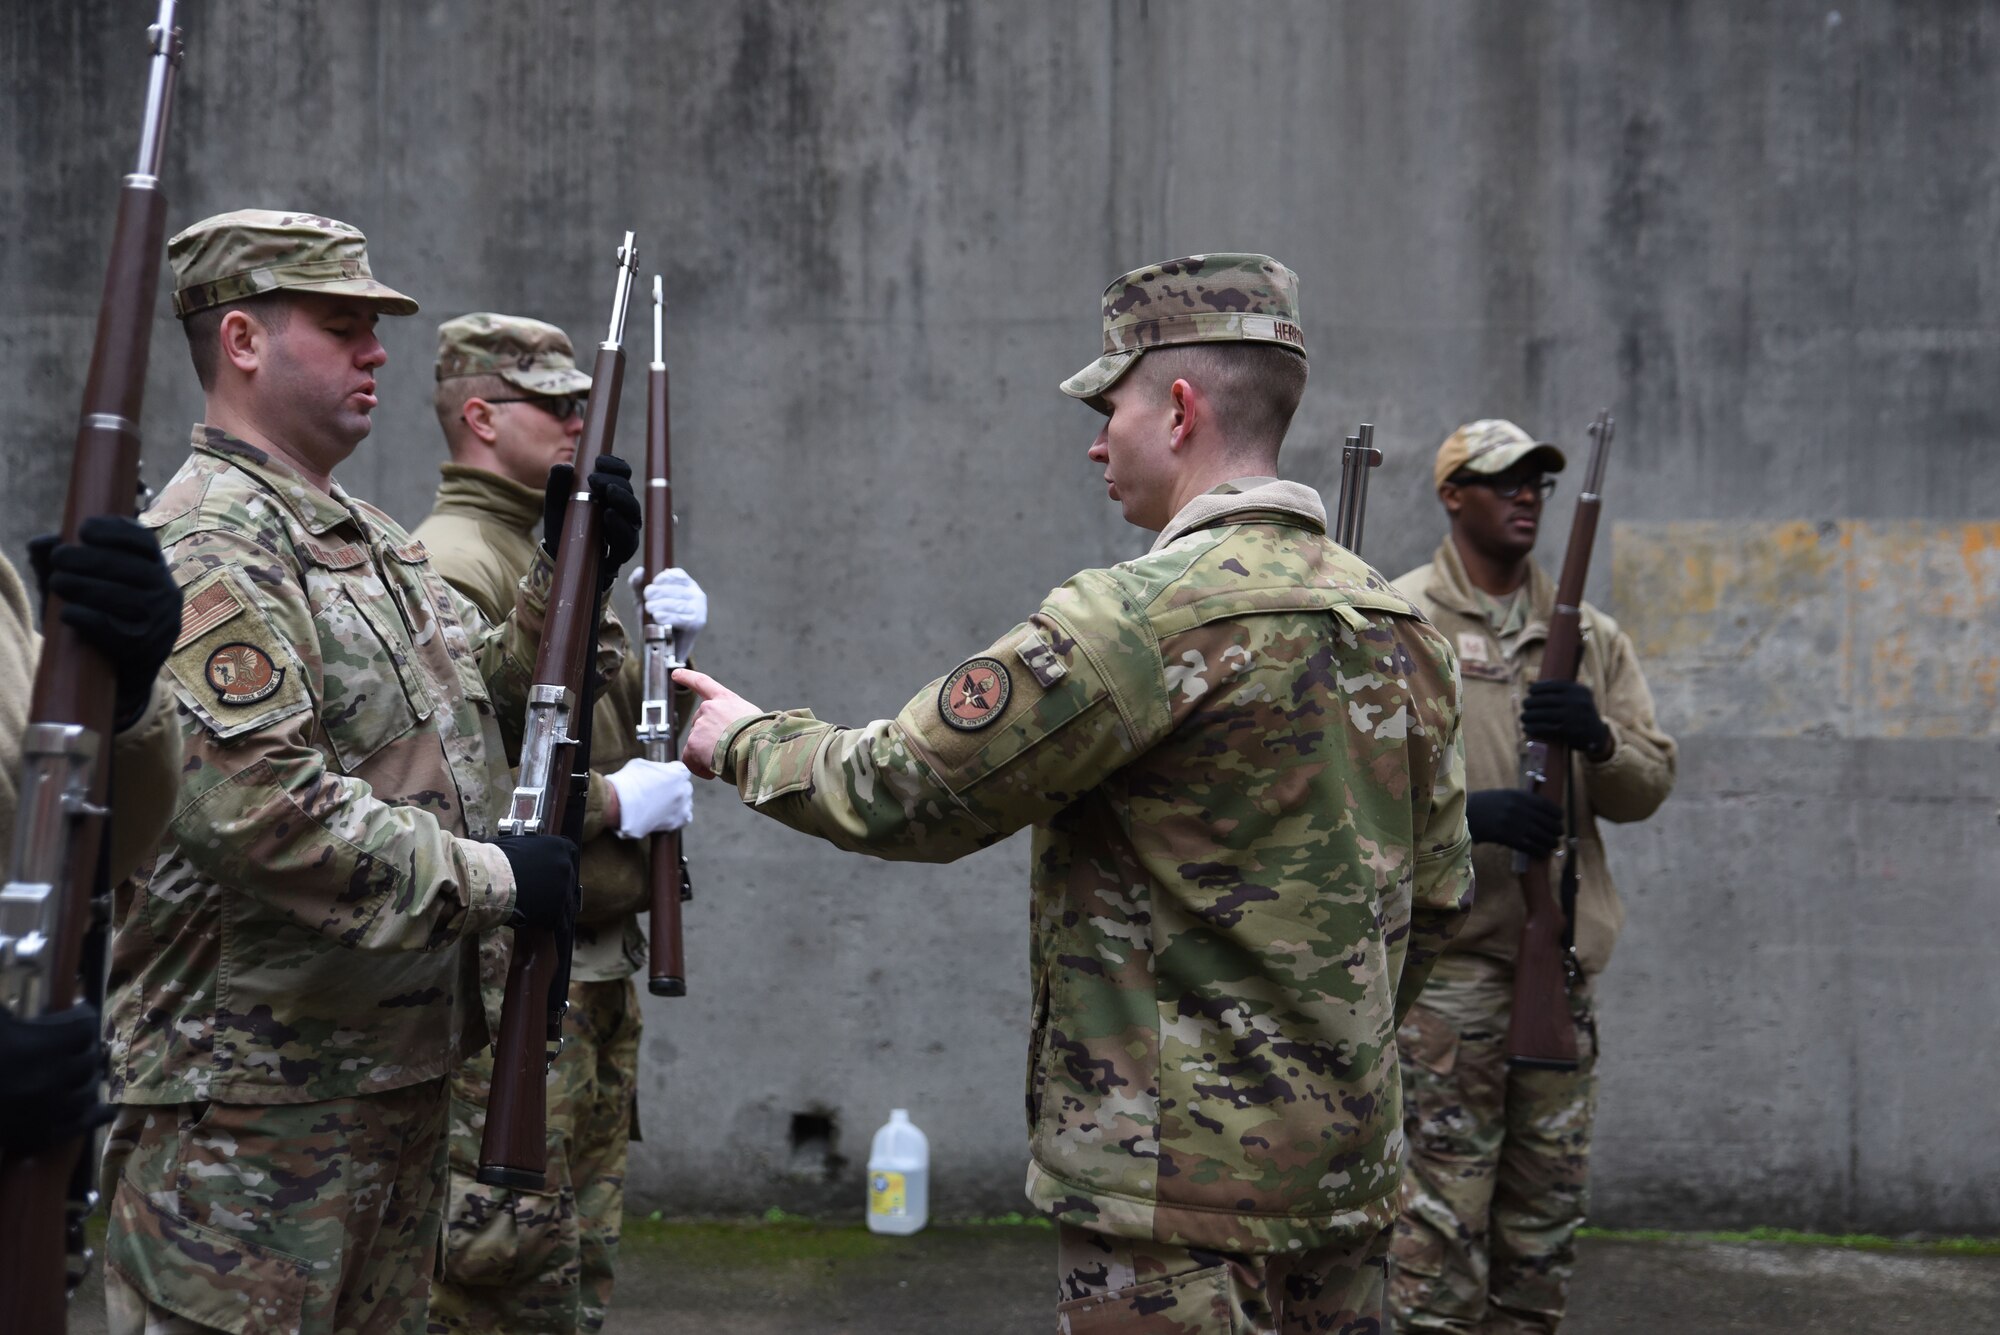 U.S. Air Force Staff Sgt. Jeffery Herron, non-commissioned officer in charge of formal training with the U.S. Air Force Honor Guard mobile training team, instructs Airmen on proper handling of their training weapon during colors training at Joint Base Lewis-McChord, Washington, Jan. 19, 2023. Herron and three other training instructors traveled to JBLM Joint Base Anacostia-Bolling, Washington D.C¸ to train Honor Guardsmen to standardize all base Honor Guard programs.